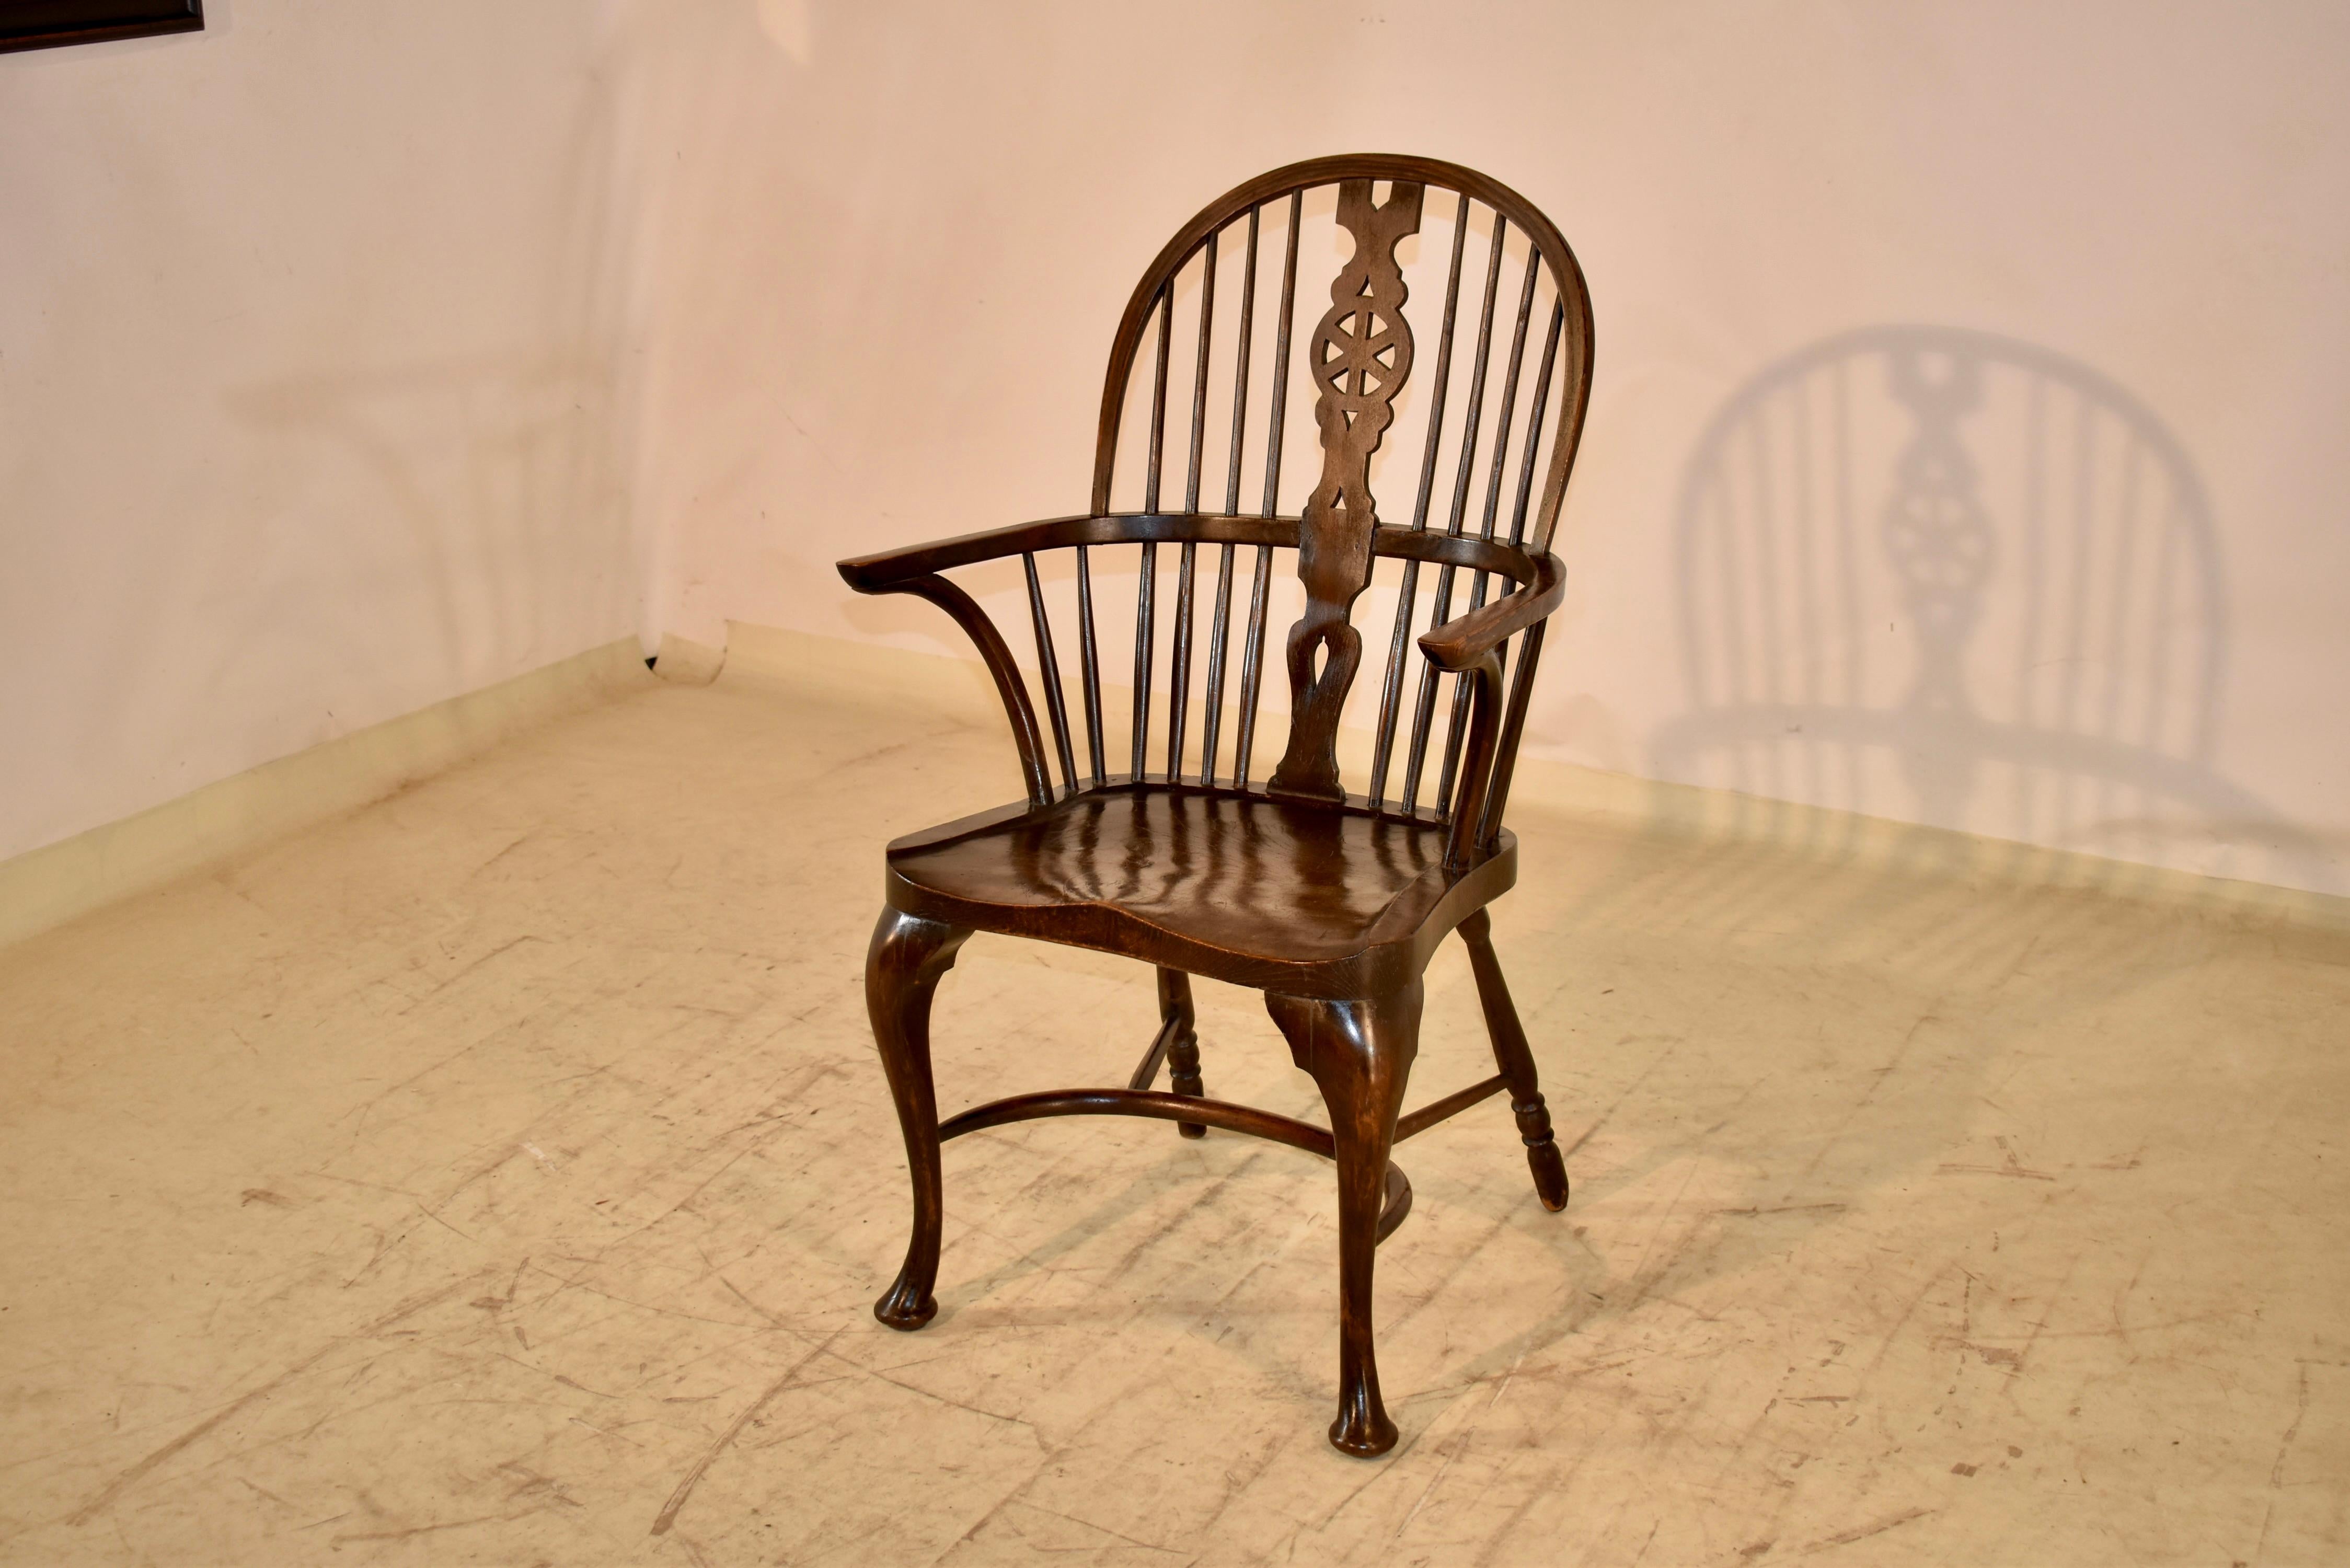 Circa 1900 English Double Bow Windsor Chair In Good Condition For Sale In High Point, NC